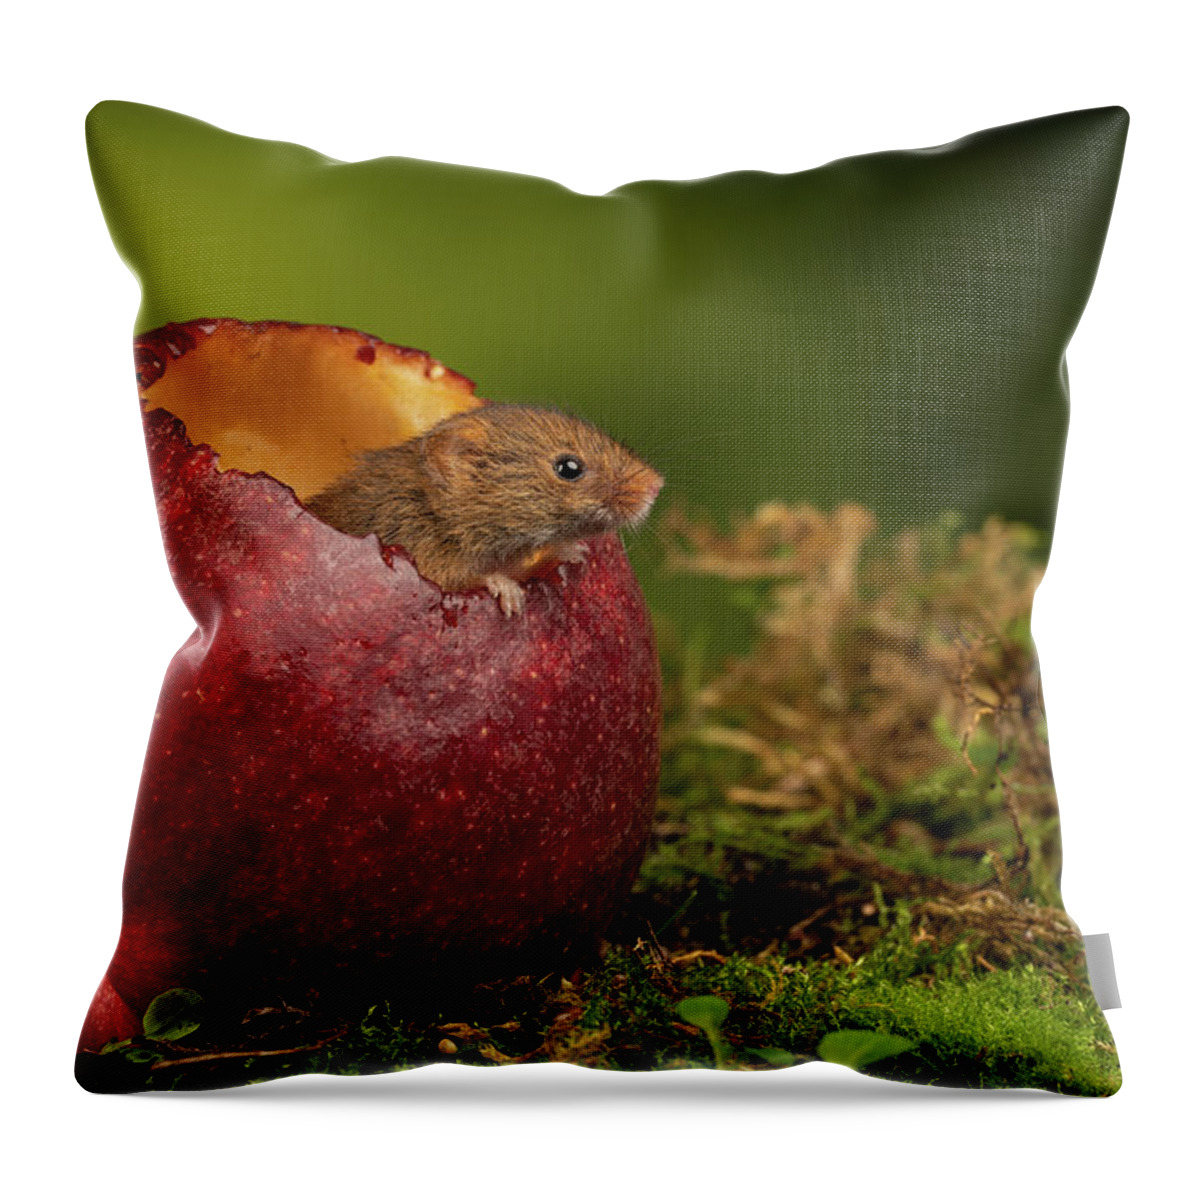 Harvest Throw Pillow featuring the photograph Hm-0838 by Miles Herbert